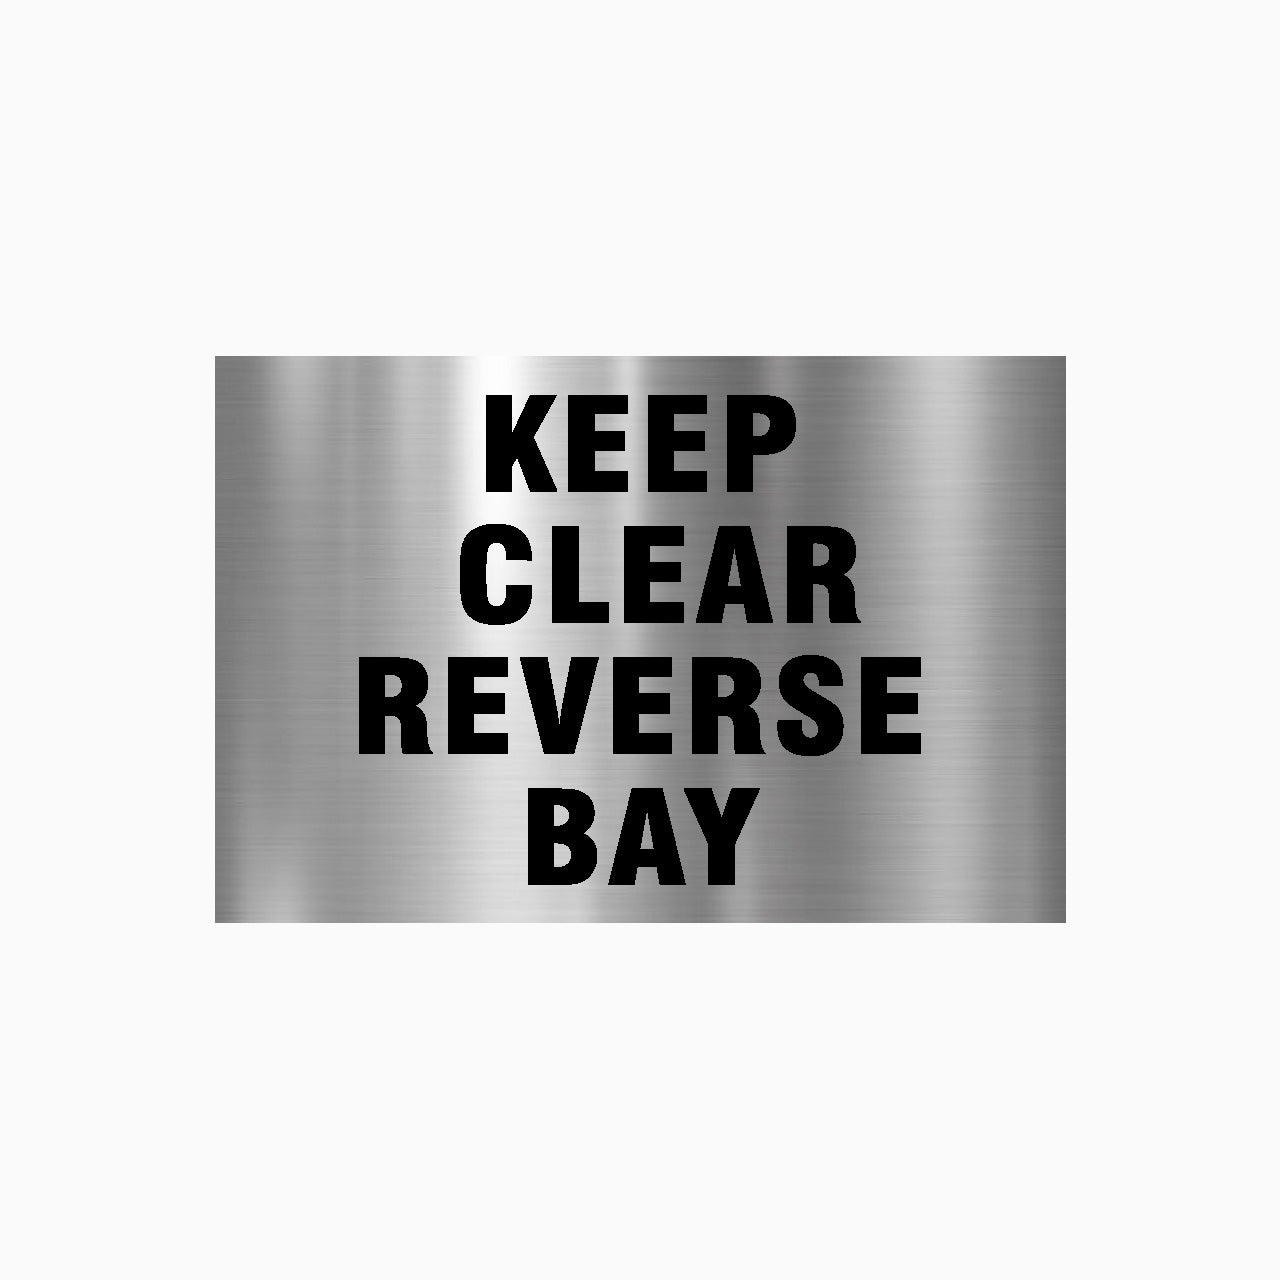 KEEP CLEAR REVERSE BAY SIGN